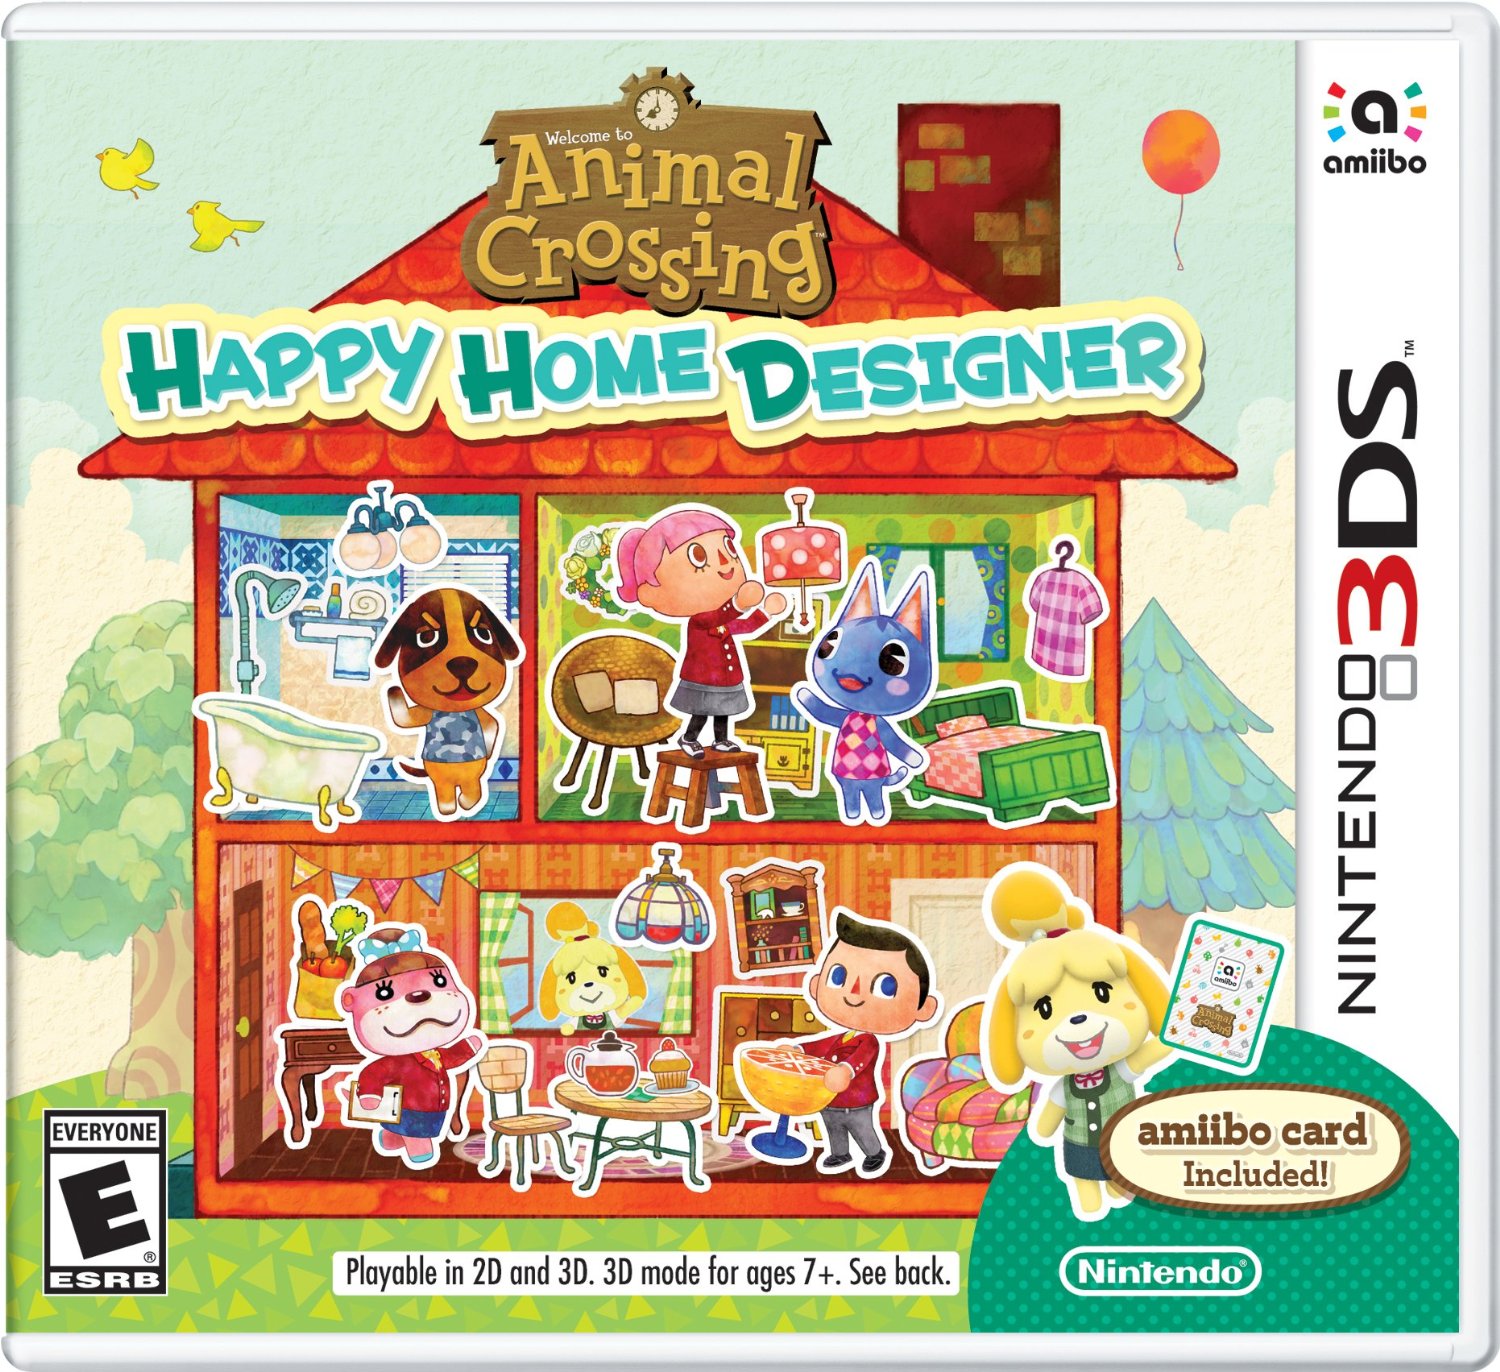 ACNL- Legend of Legacy Main Character Outfits by ACNL-QR-CODEZ on